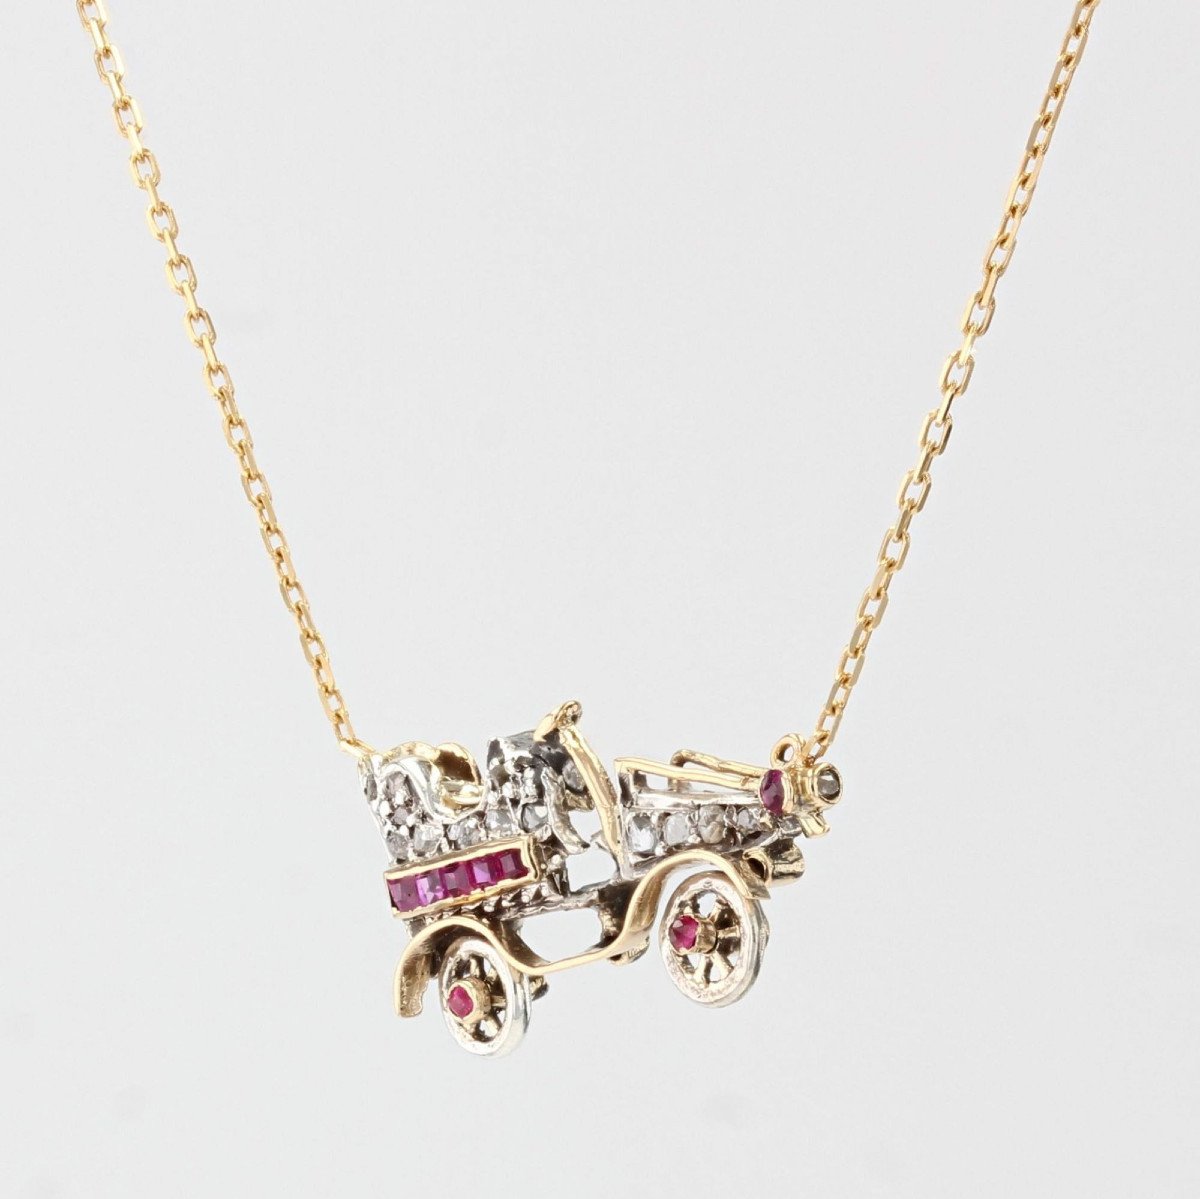 Old Car Necklace In Diamonds And Rubies-photo-4